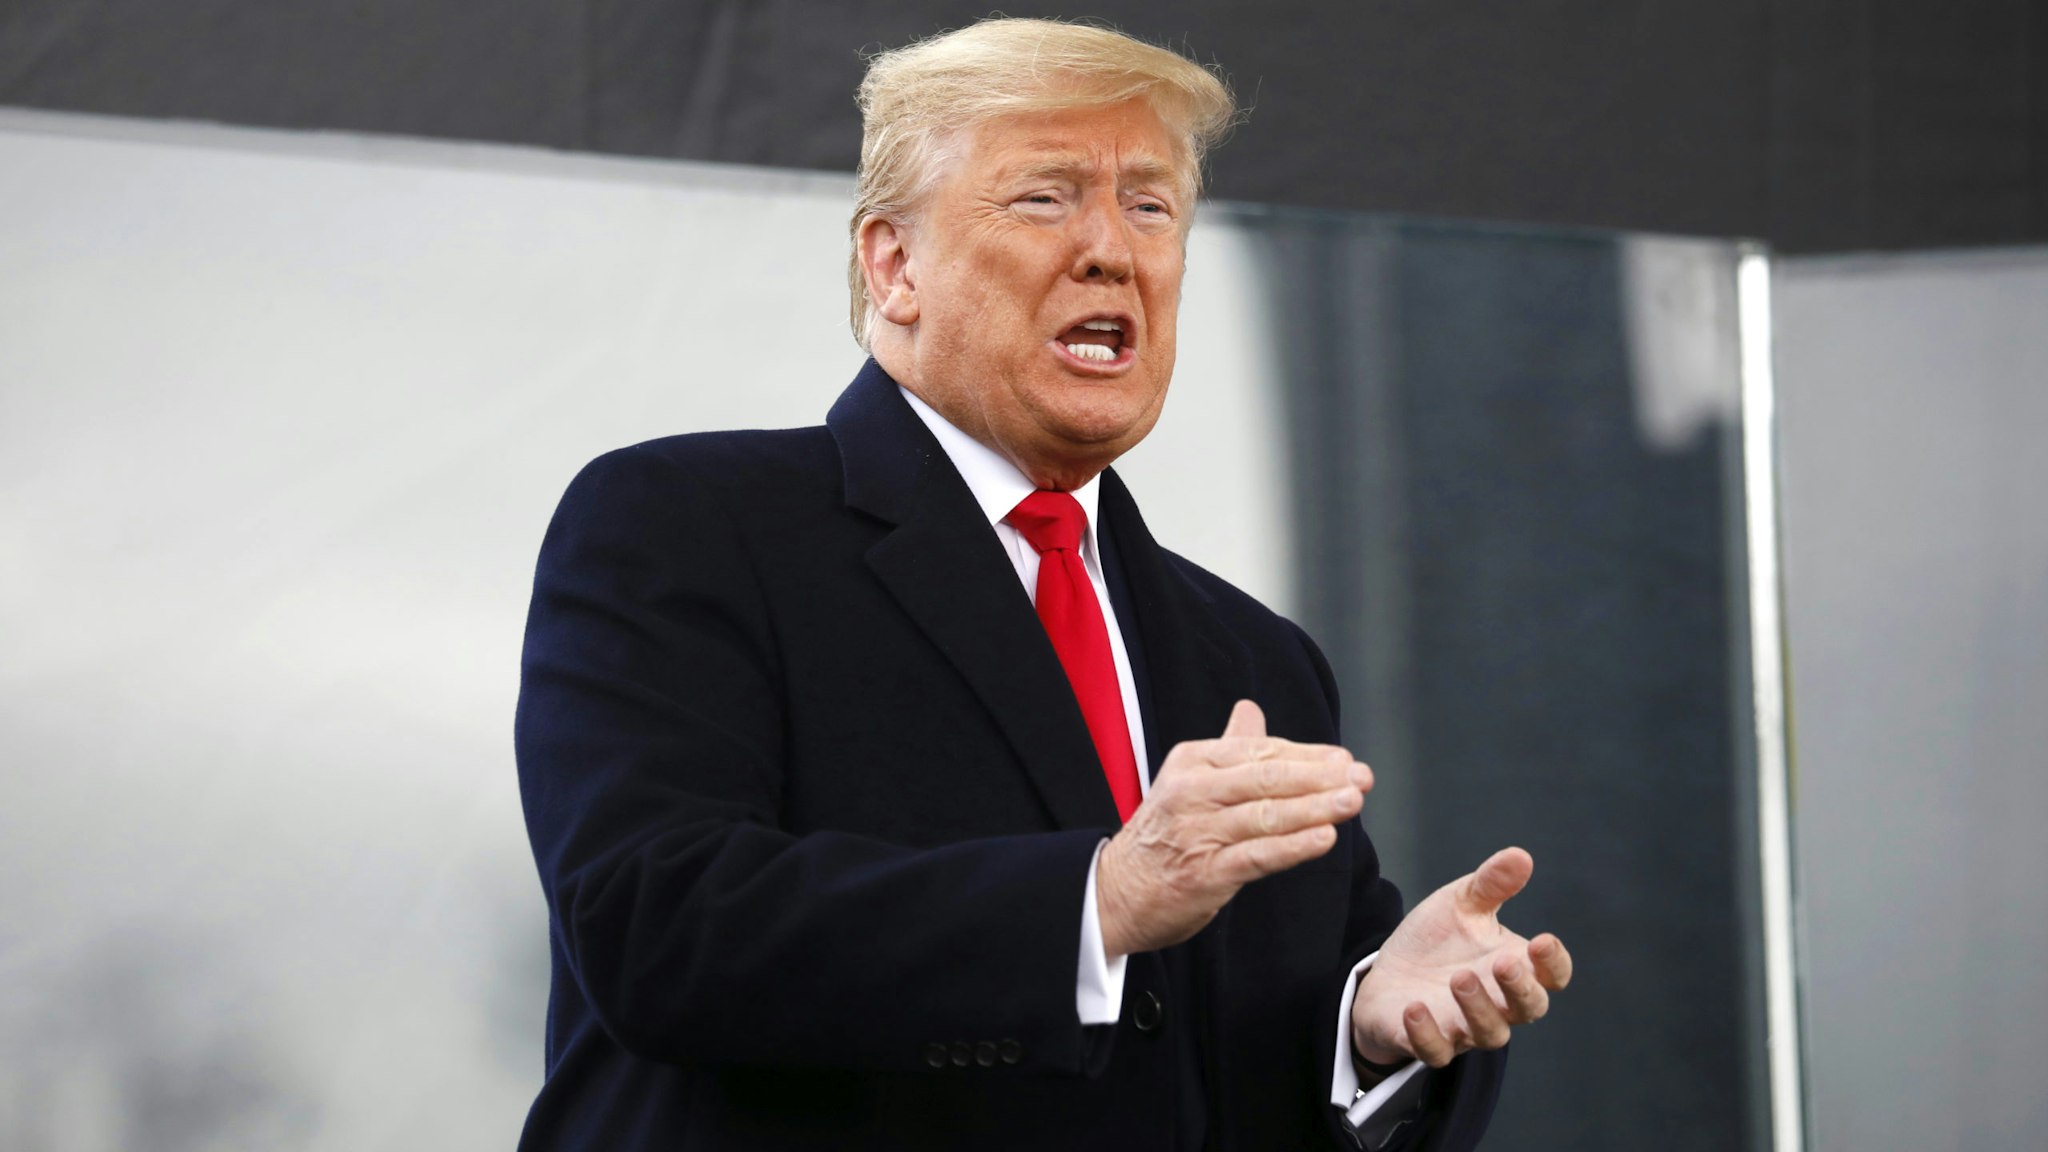 U.S. President Donald Trump speaks during a March for Life rally on the National Mall in Washington, D.C., U.S., on Friday, Jan. 24, 2020. Trump, making the first in-person address by a U.S. president at a major anti-abortion rally in Washington, called himself a strong defender of the unborn and blasted Democrats for their "radical and extreme" positions.